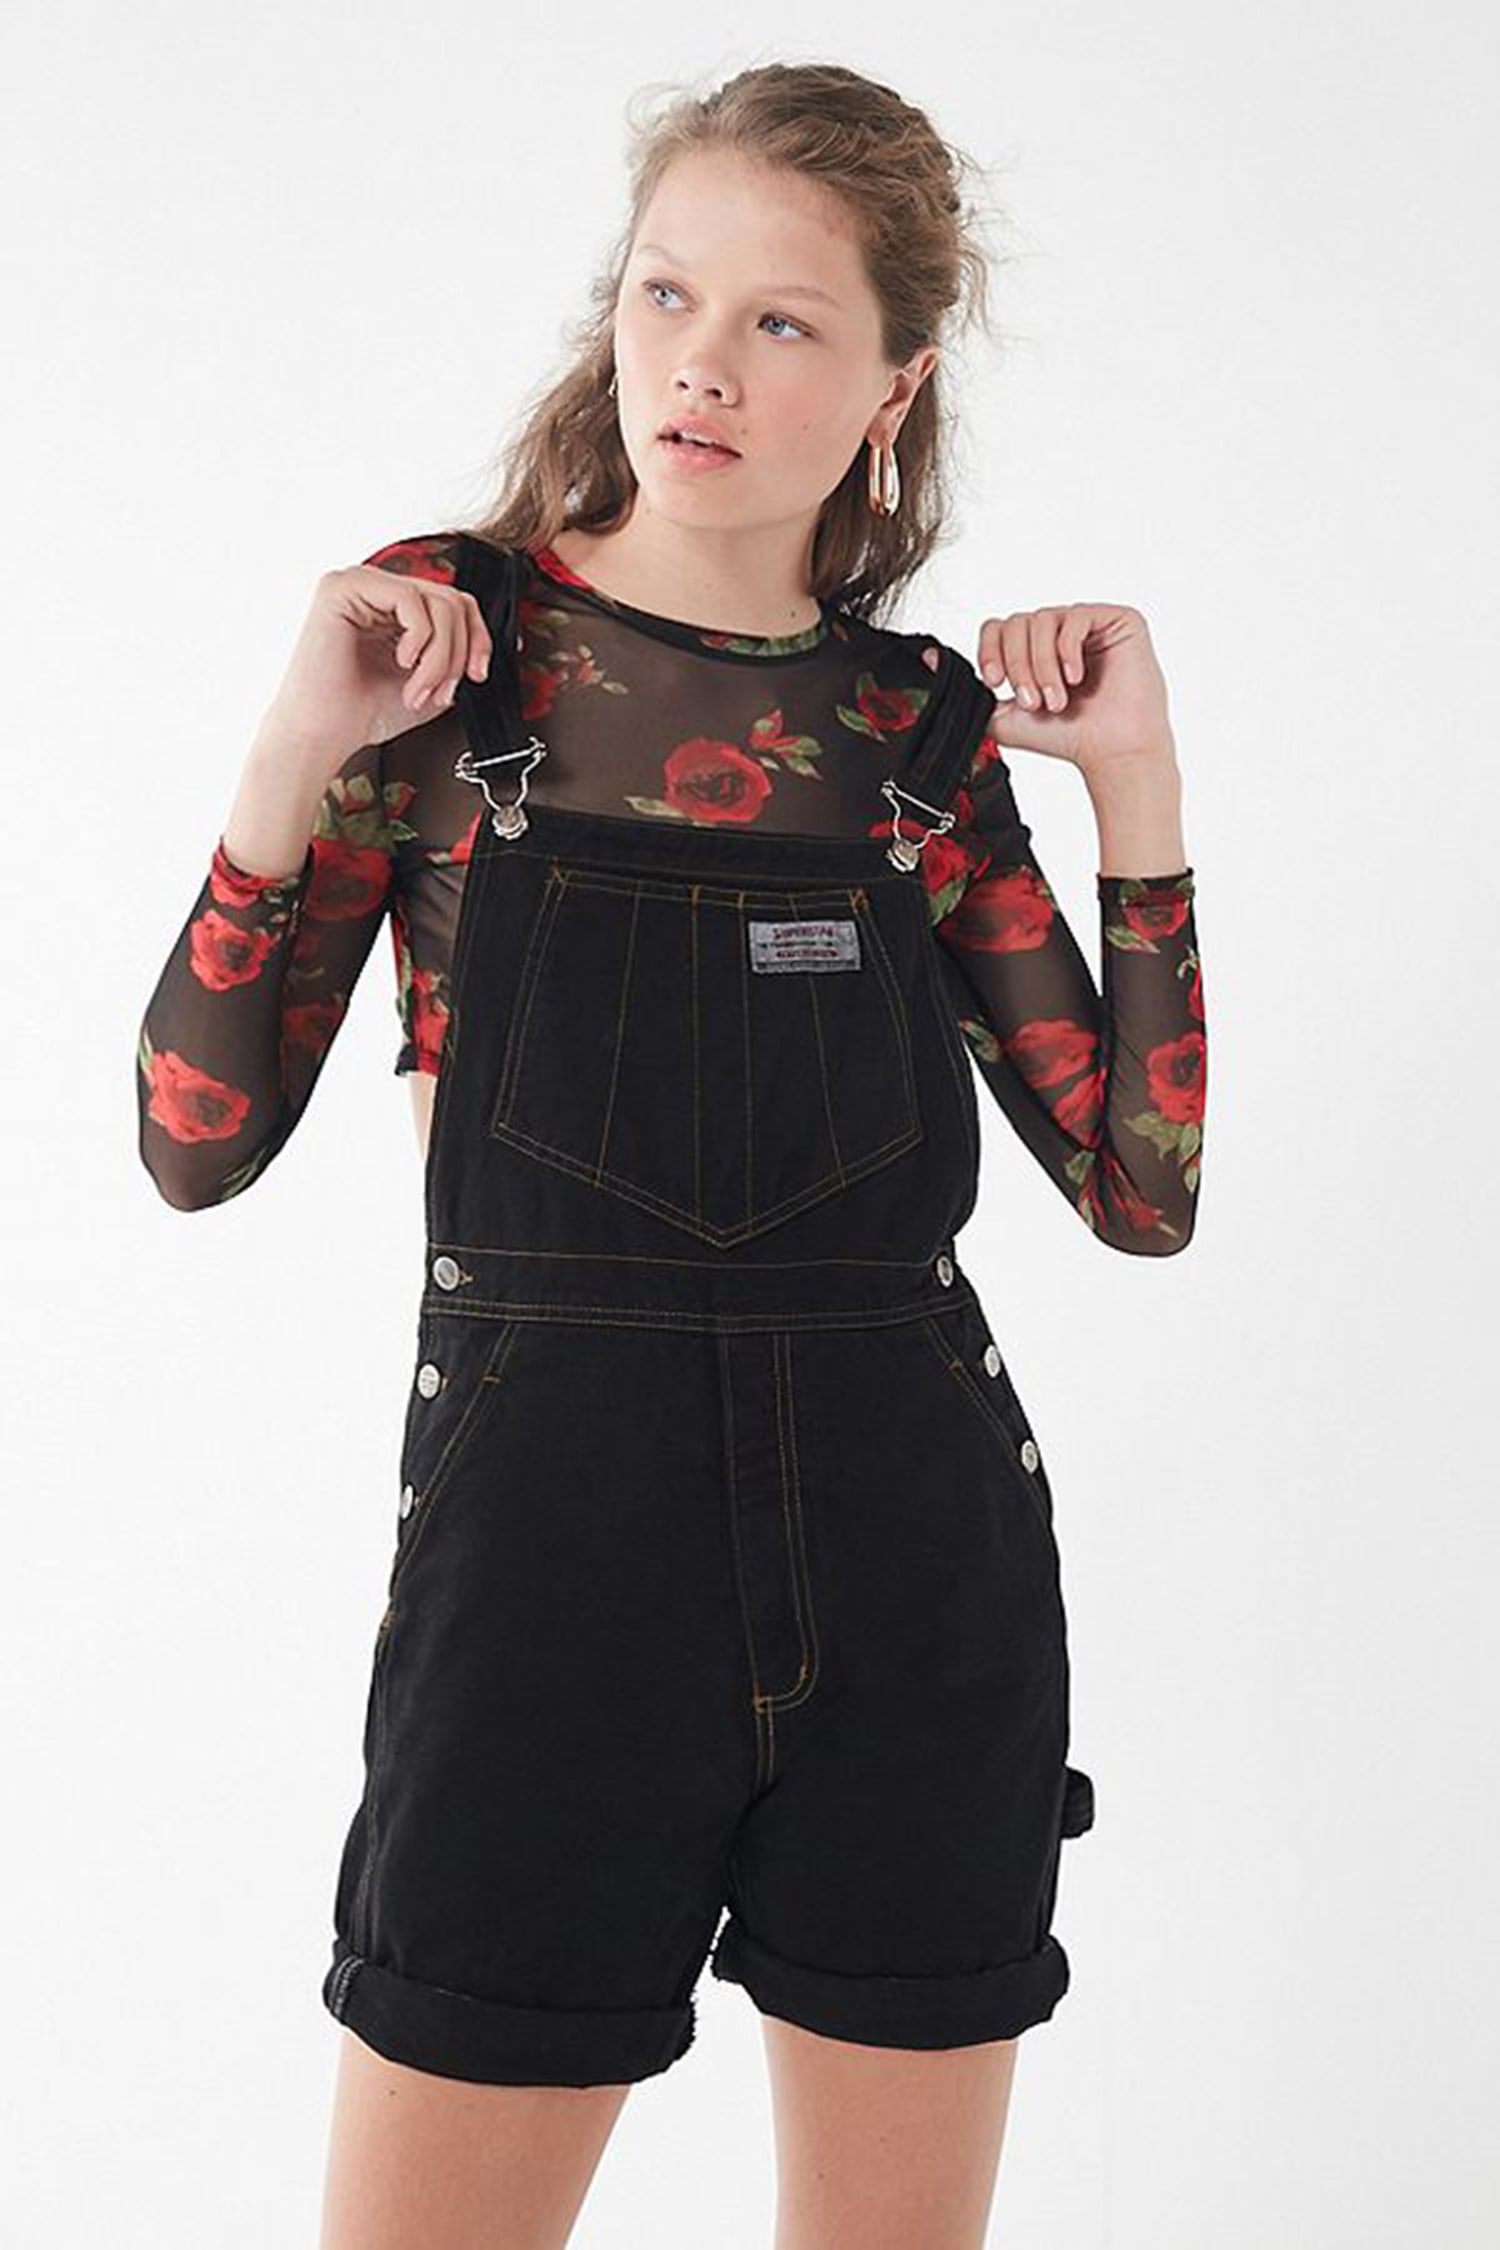 90s Fashion Trends Overalls | paolomangiola.it